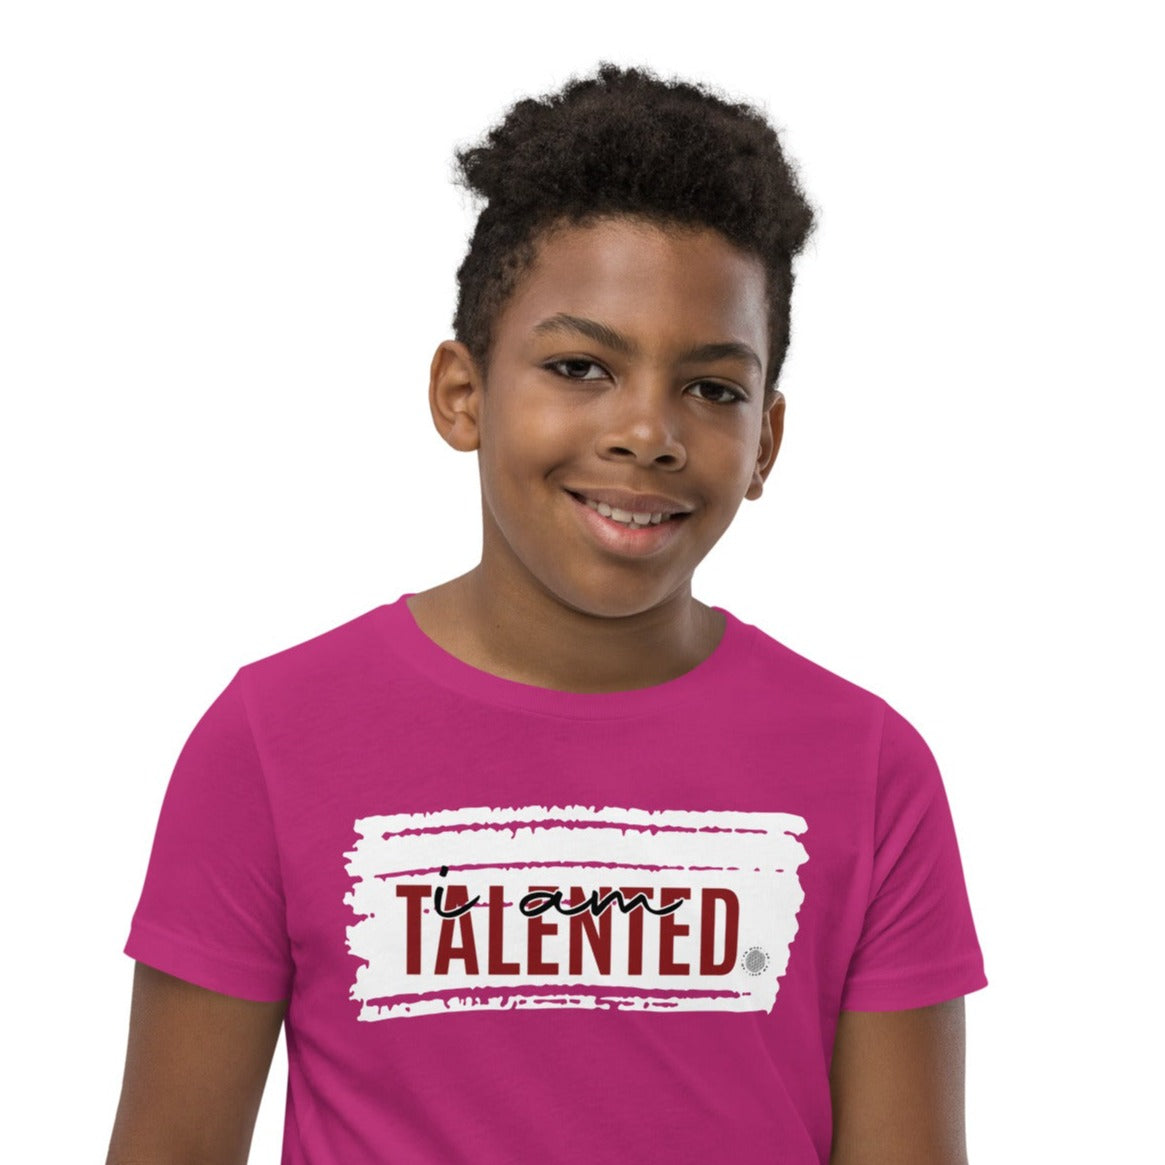 I Am Talented Youth T-Shirt berry